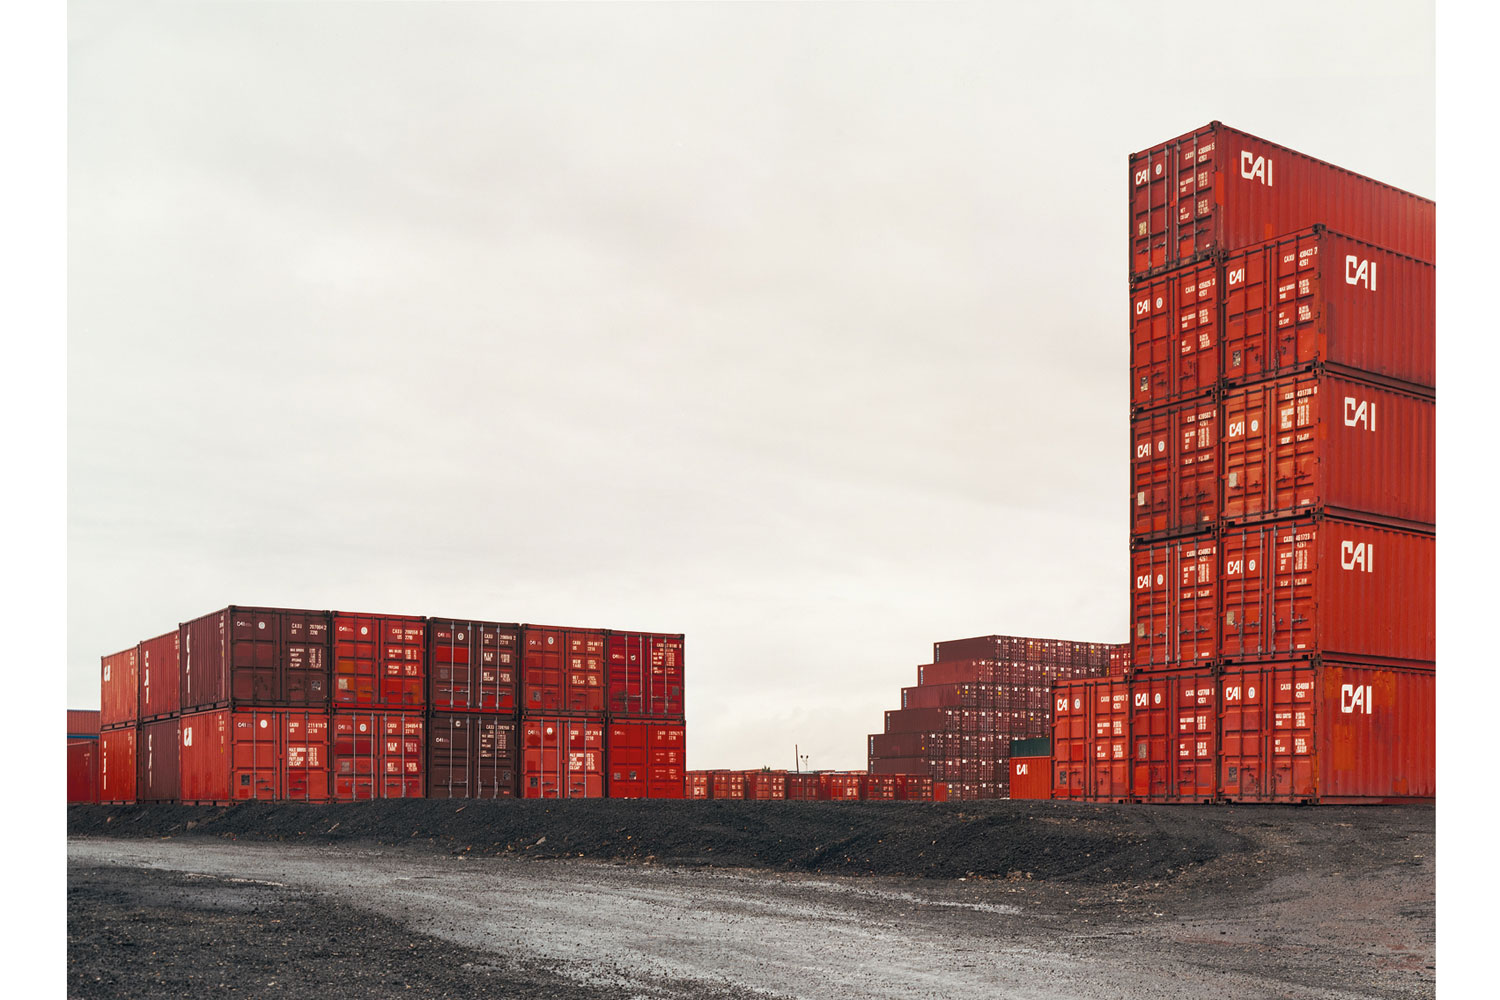 Untitled (Red containers, stacked), Newark, New Jersey, 2001